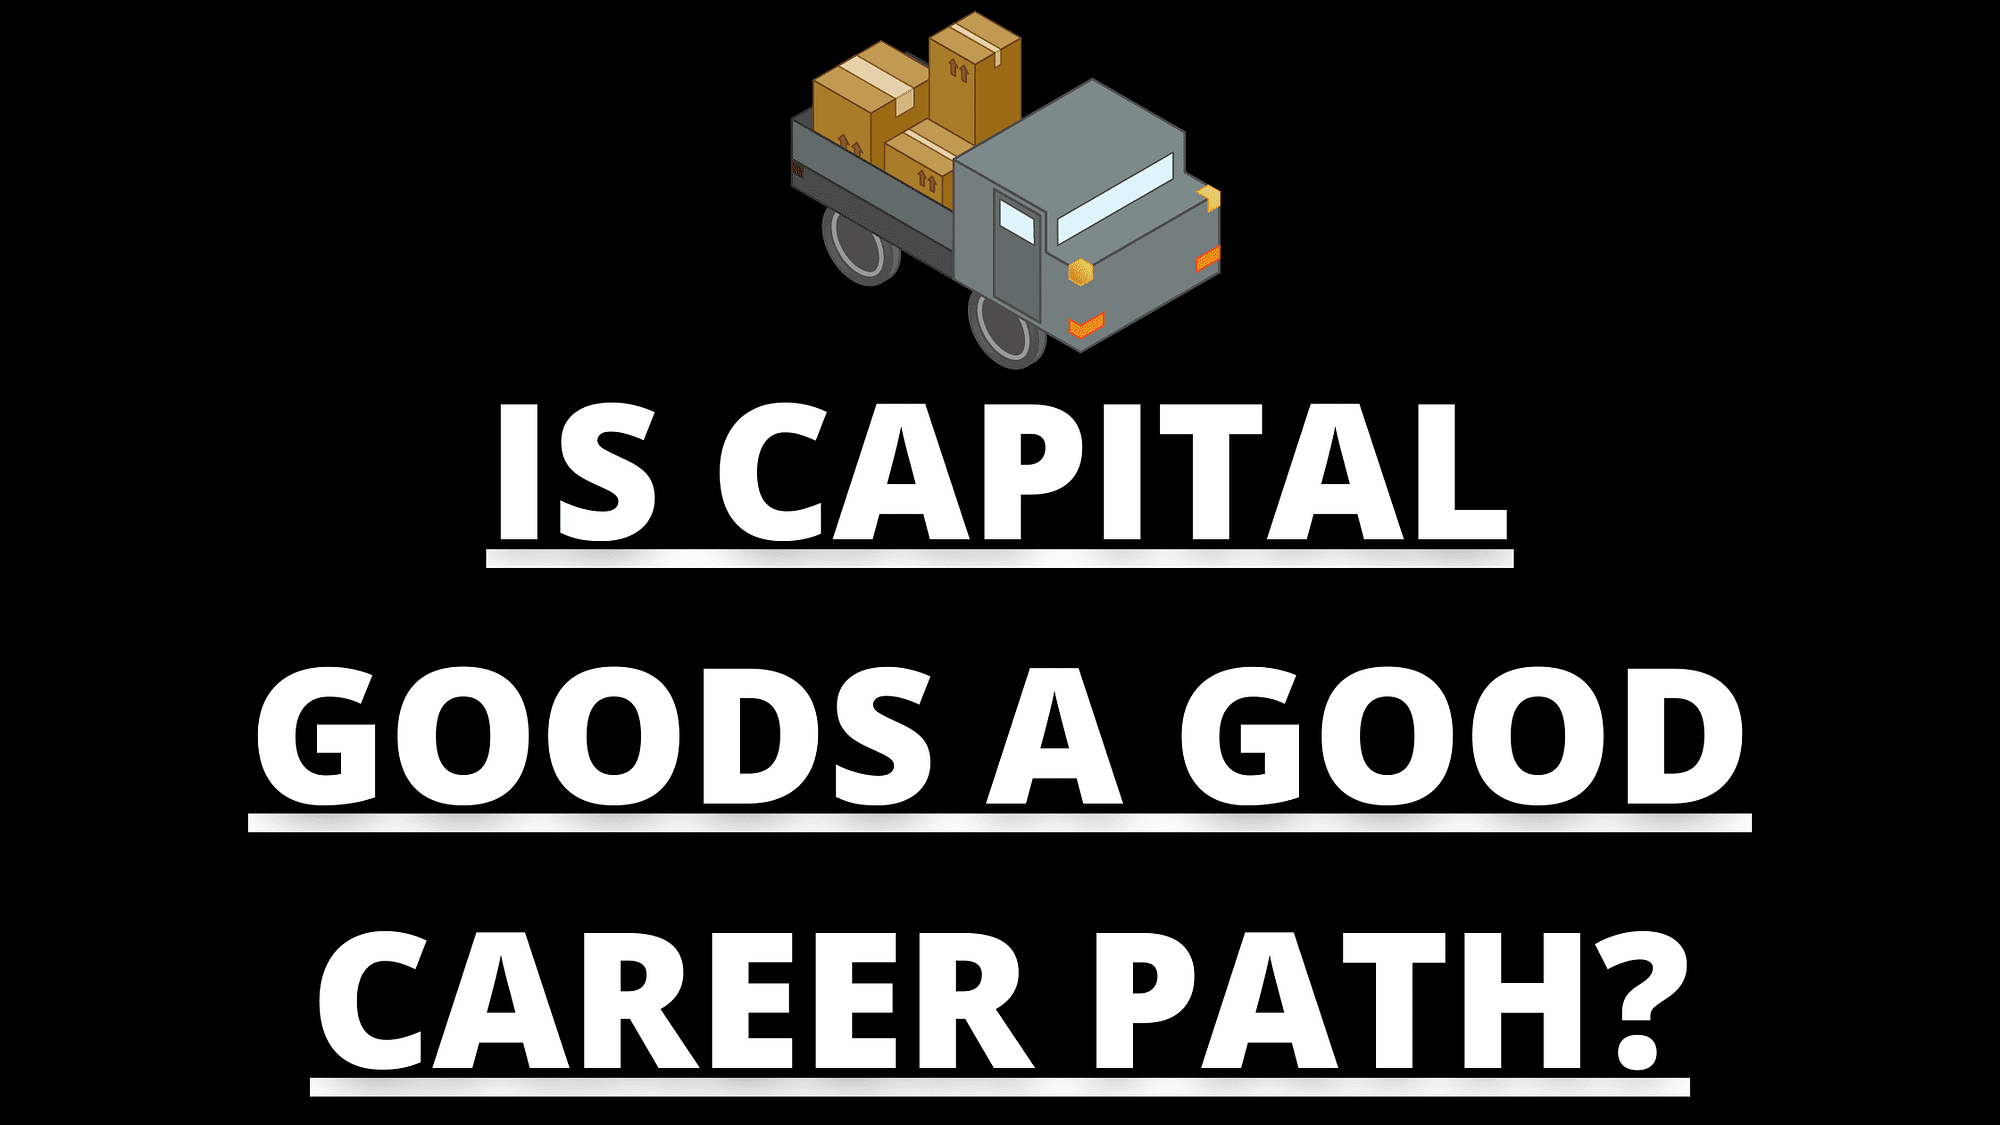 You are currently viewing is capital goods a good career path?